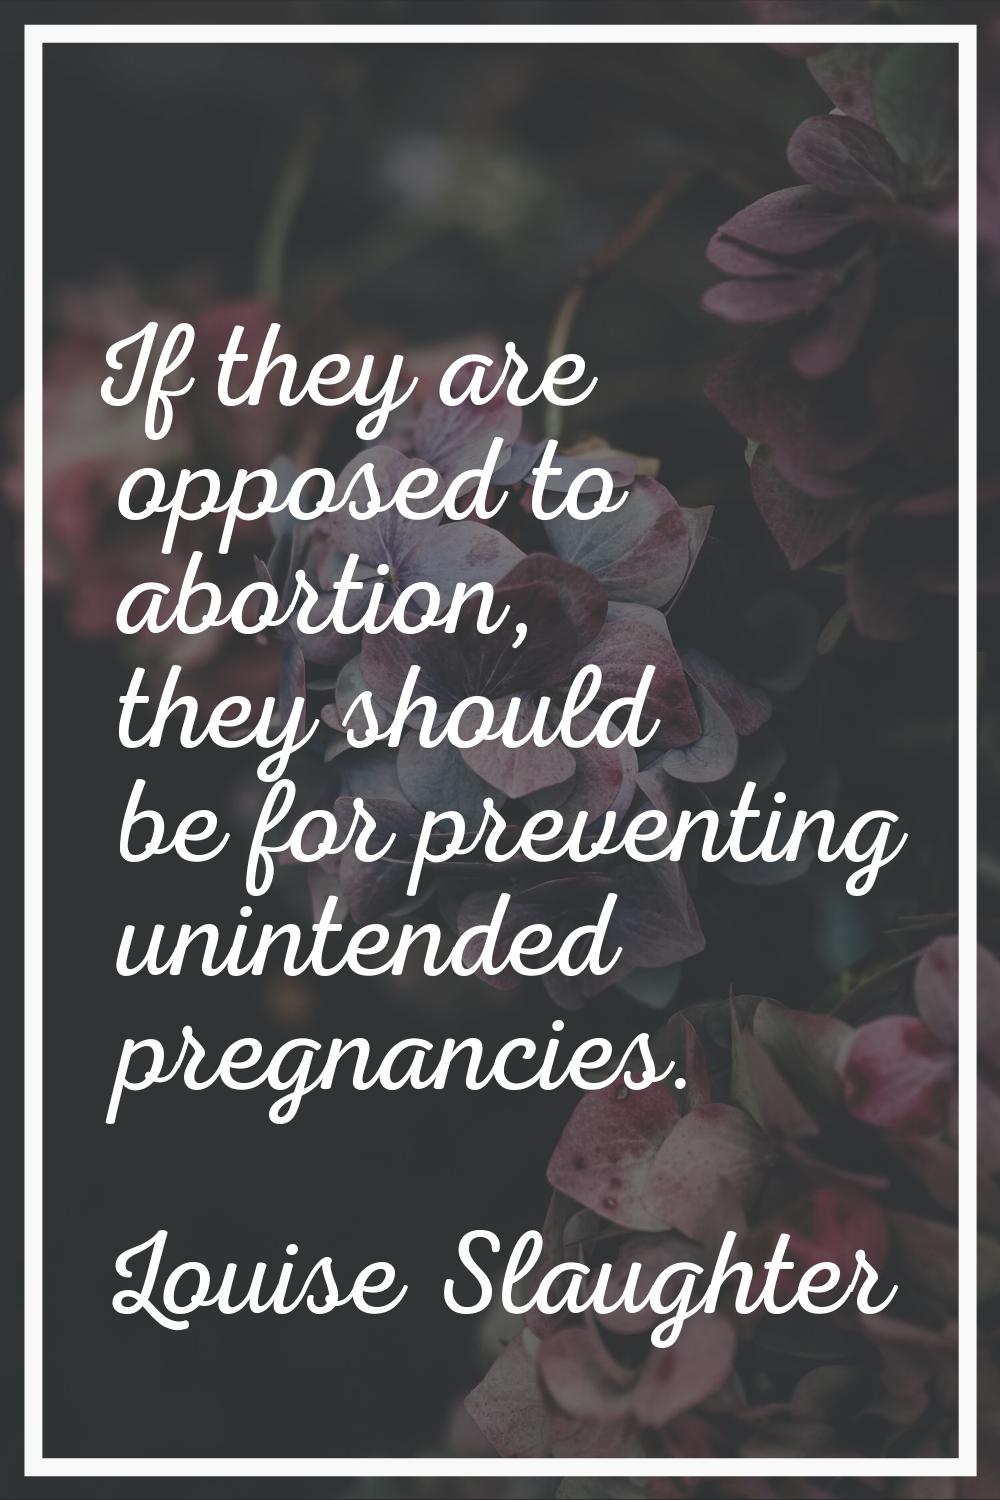 If they are opposed to abortion, they should be for preventing unintended pregnancies.